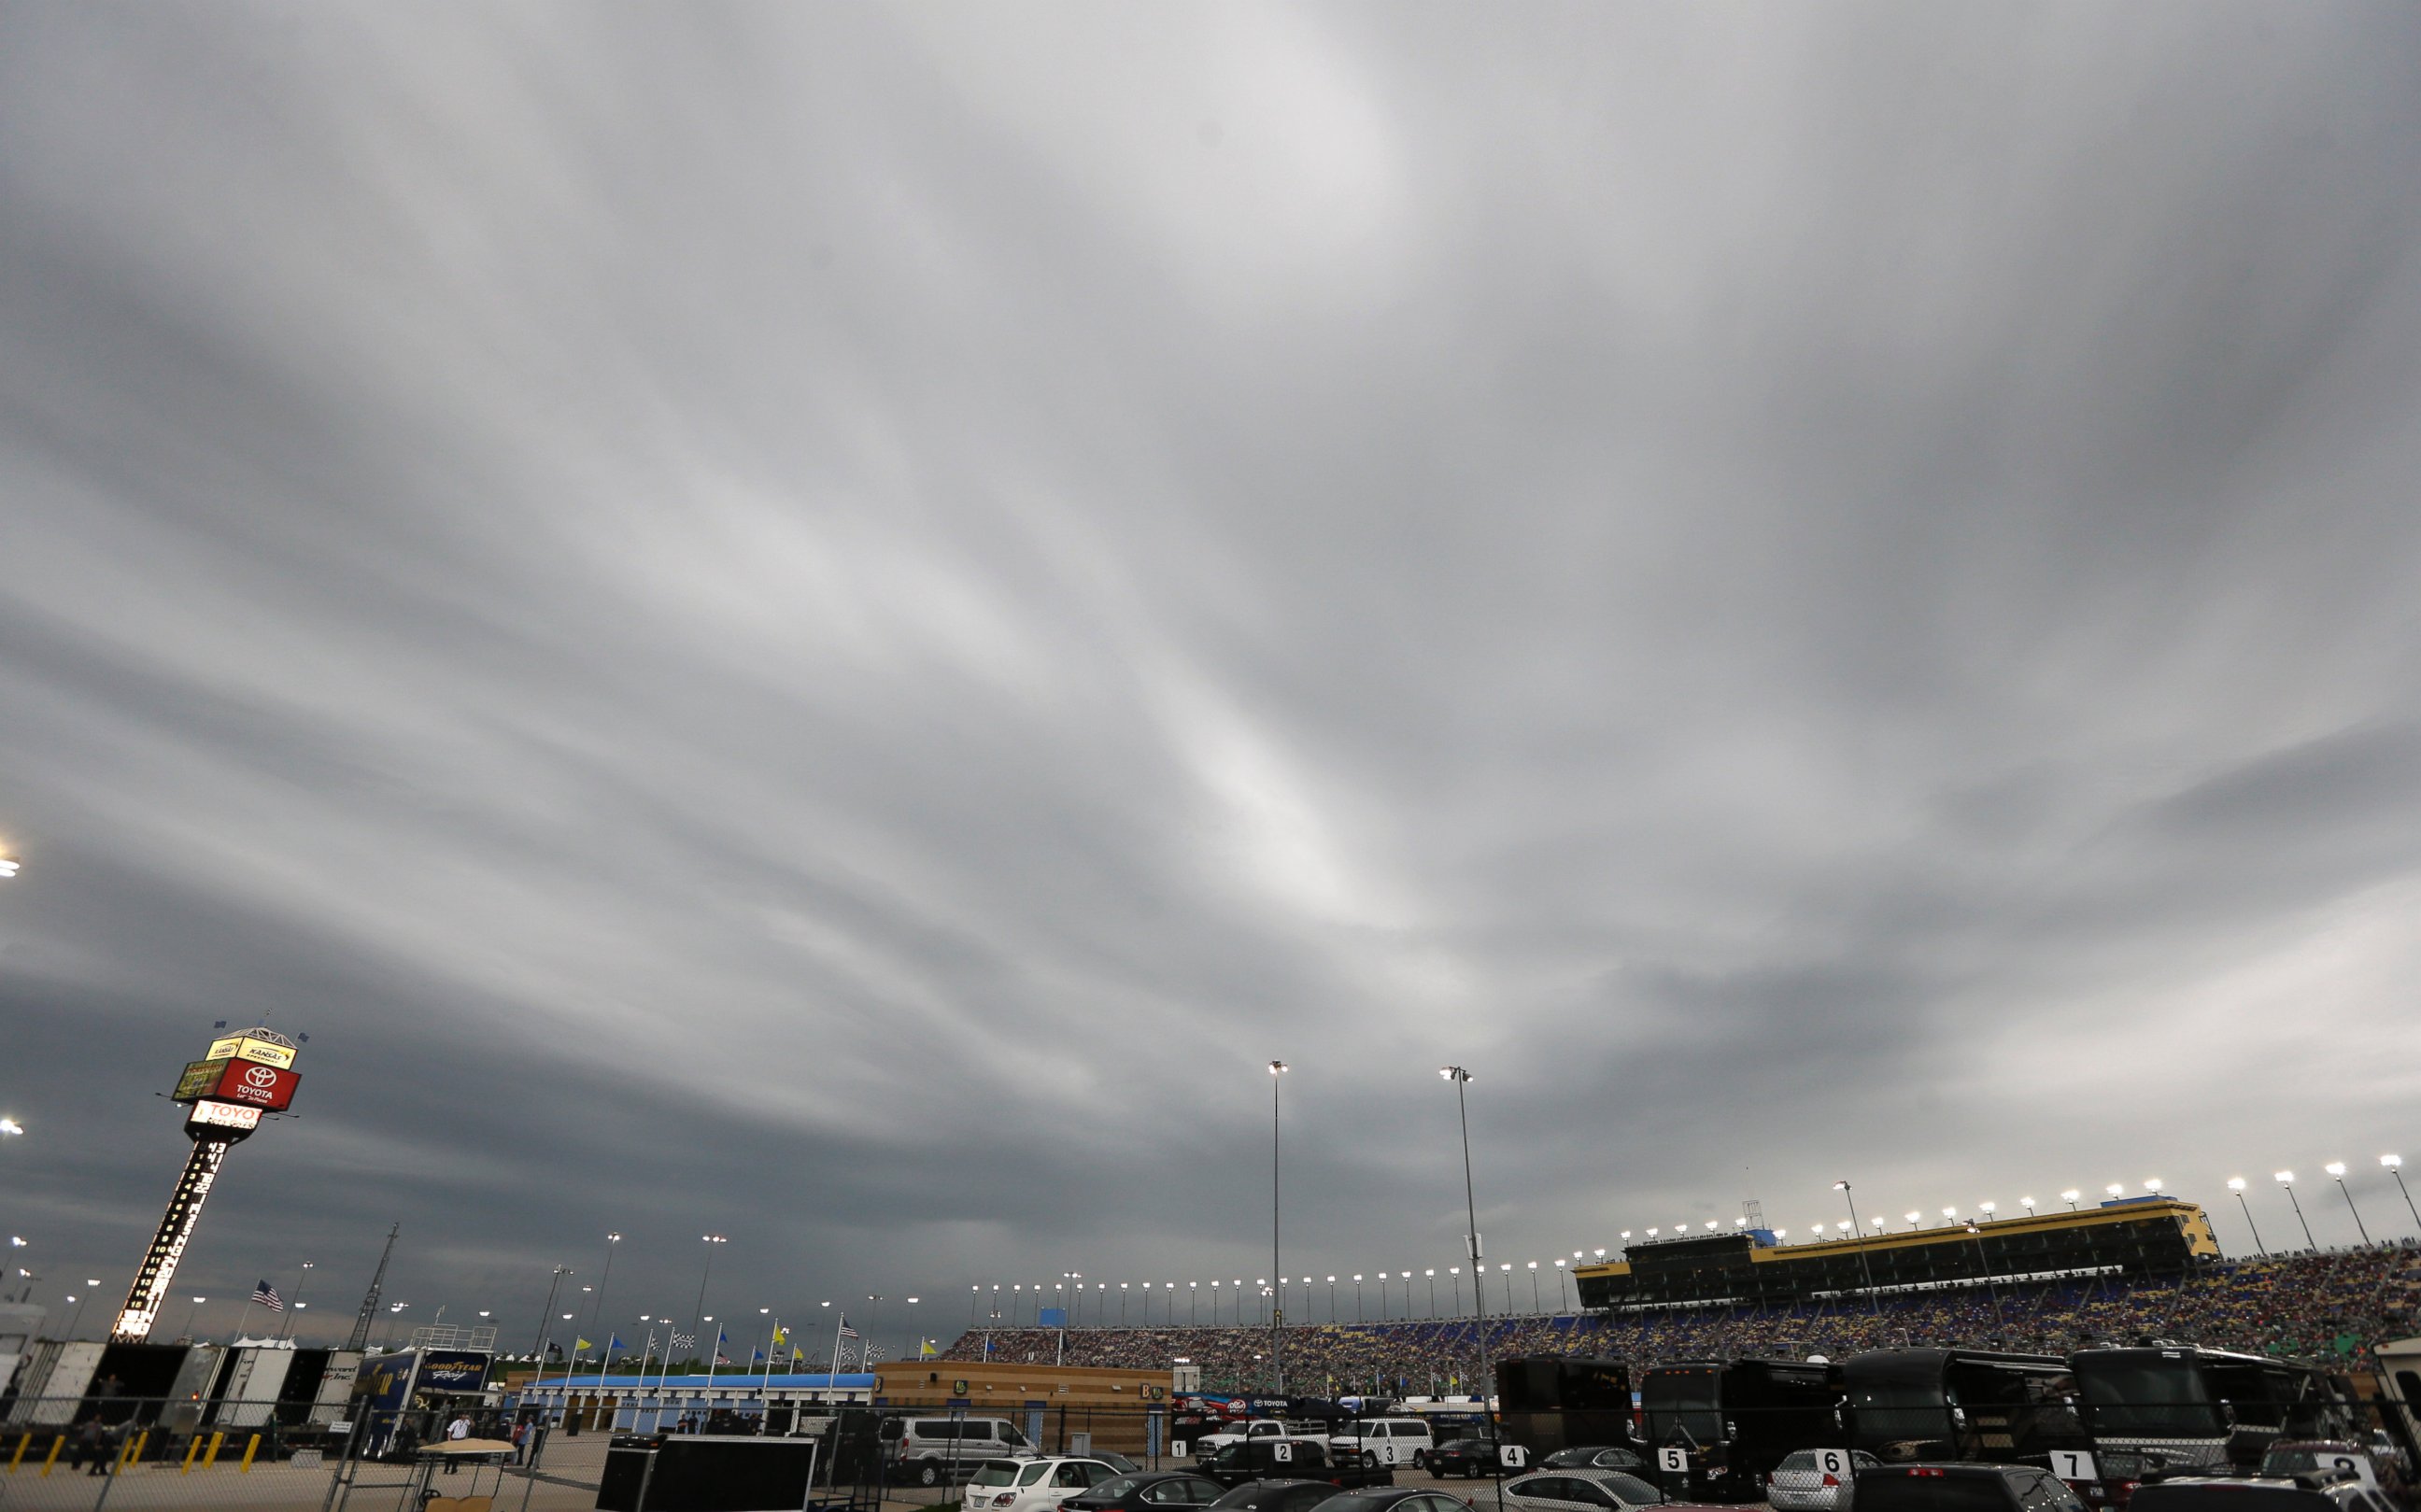 PHOTO: Storms clouds begin to move over Kansas Speedway during a Sprint Cup Series auto race at in Kansas City, Kan., Saturday, May 9, 2015.